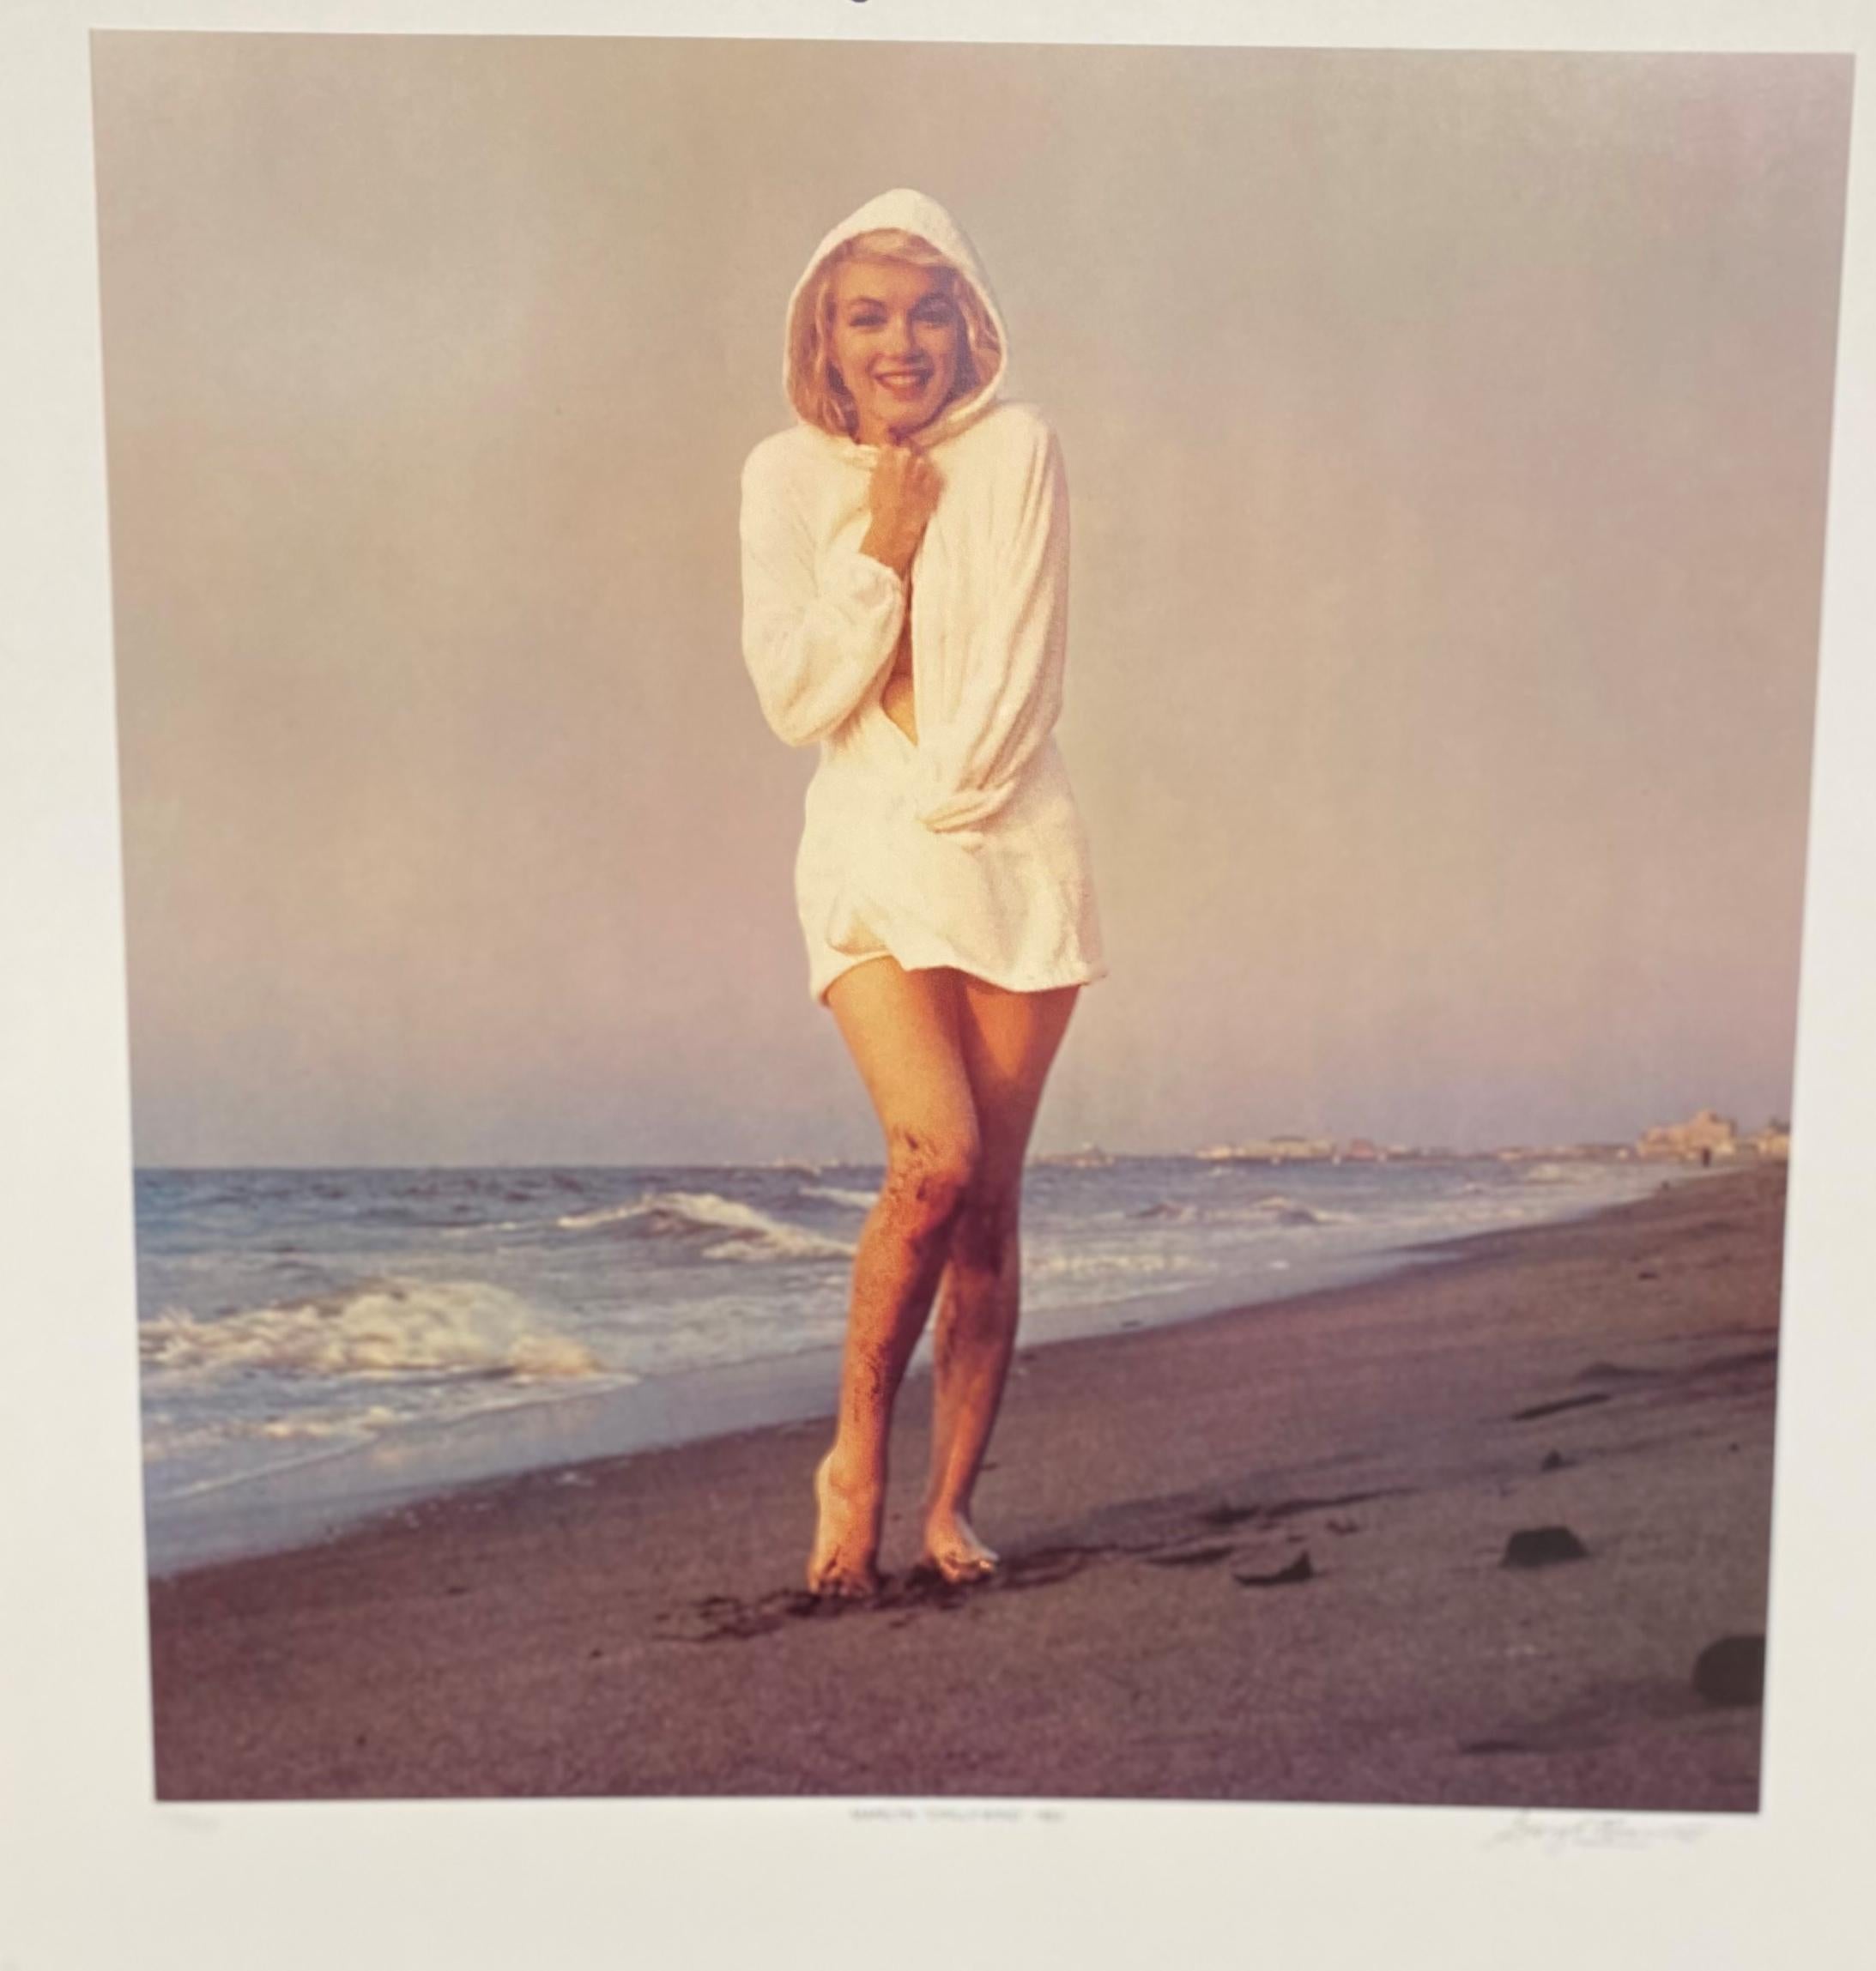 This image is from the last photoshoot of Marilyn Monroe taken by George Harris, 2 1/2 weeks before her death in August, 1962 in Santa Monica, California. Photolithograph taken from the original negative. Published by Edward Weston Fine Art, Los